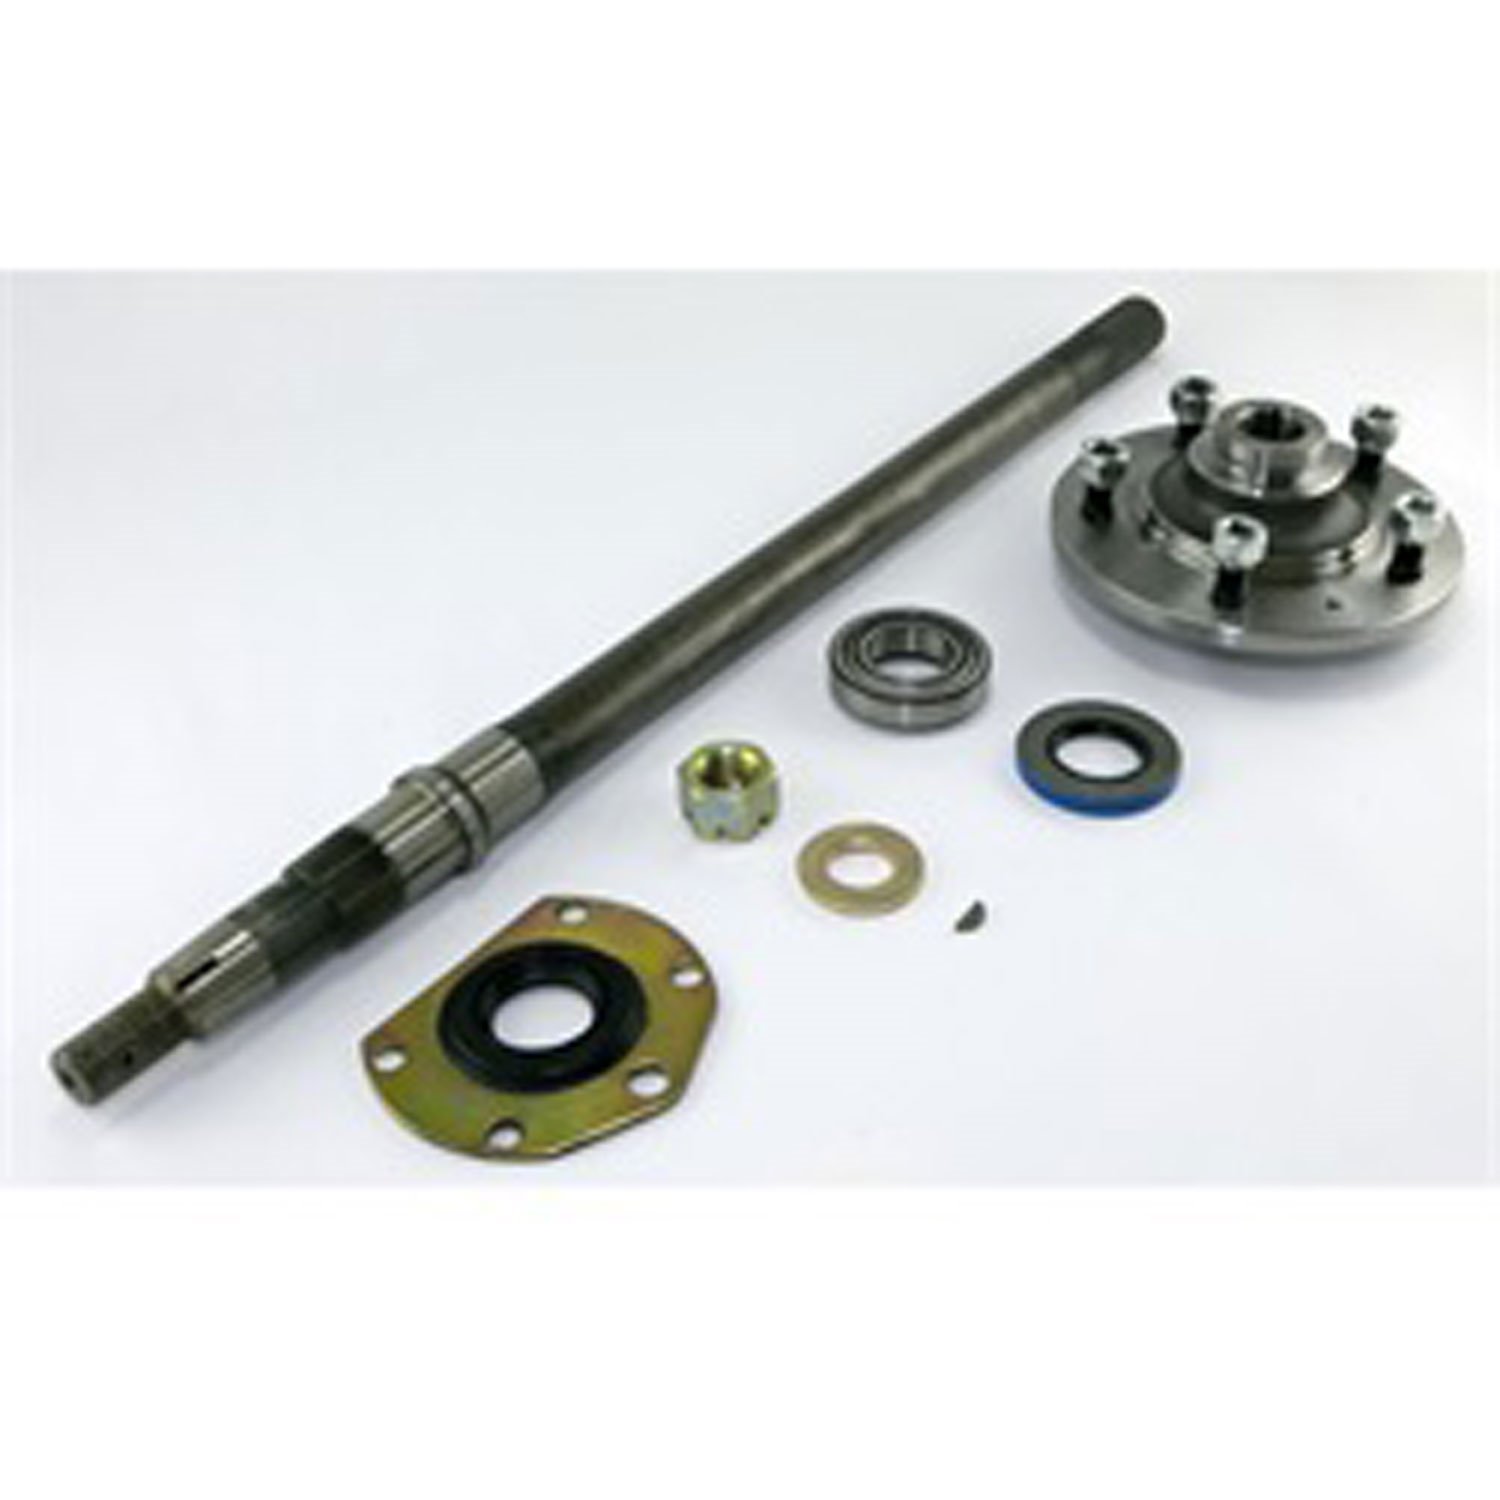 Axle Shaft Kit AMC20 Narrow LH 26.25 inch Includes Axle Hub Bearing Cup Inner Seal Outer Seal Nut Wa